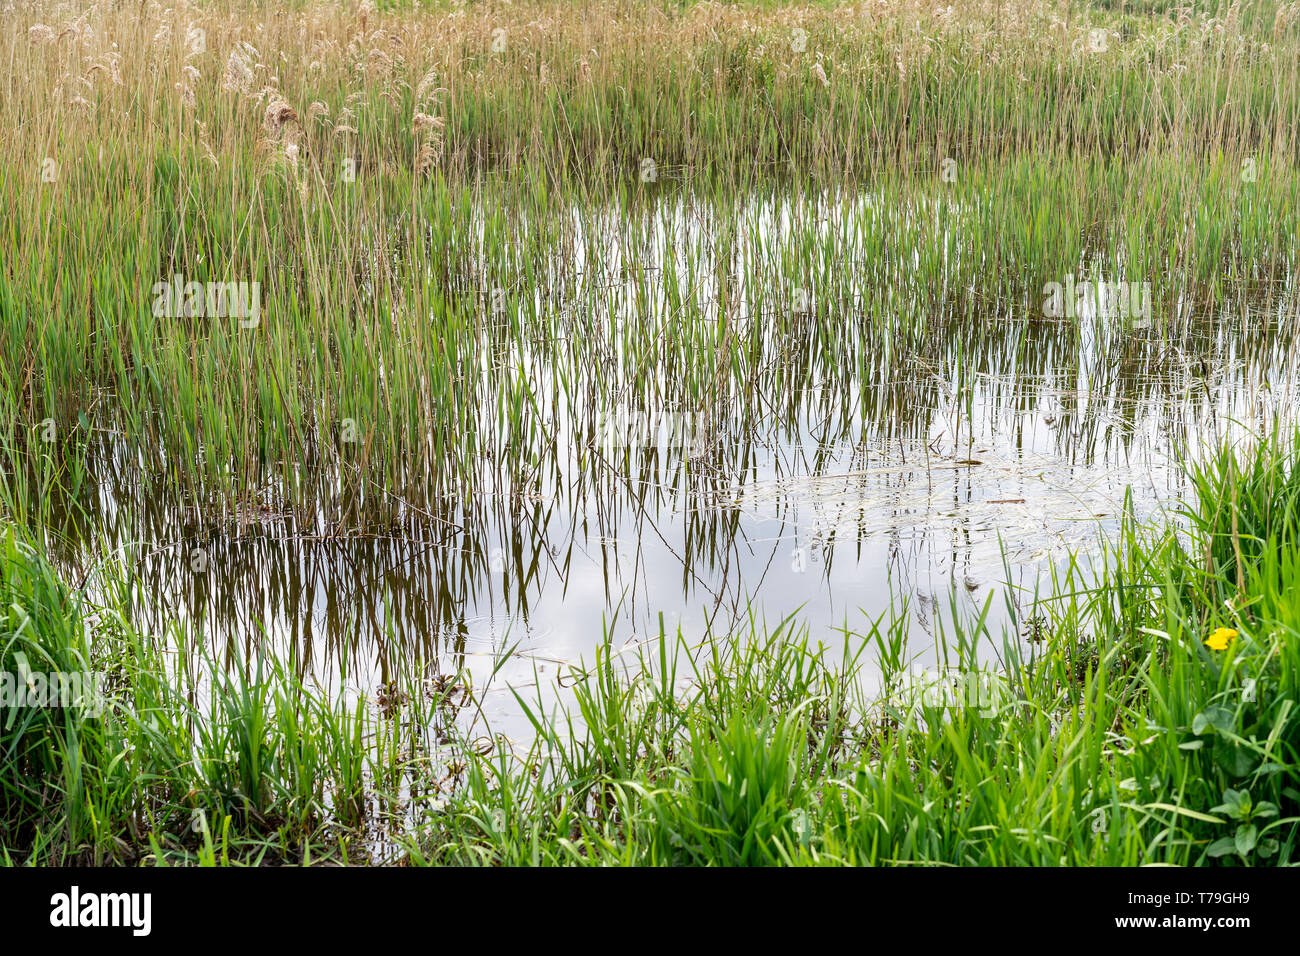 Reeds reflected in water Stock Photo